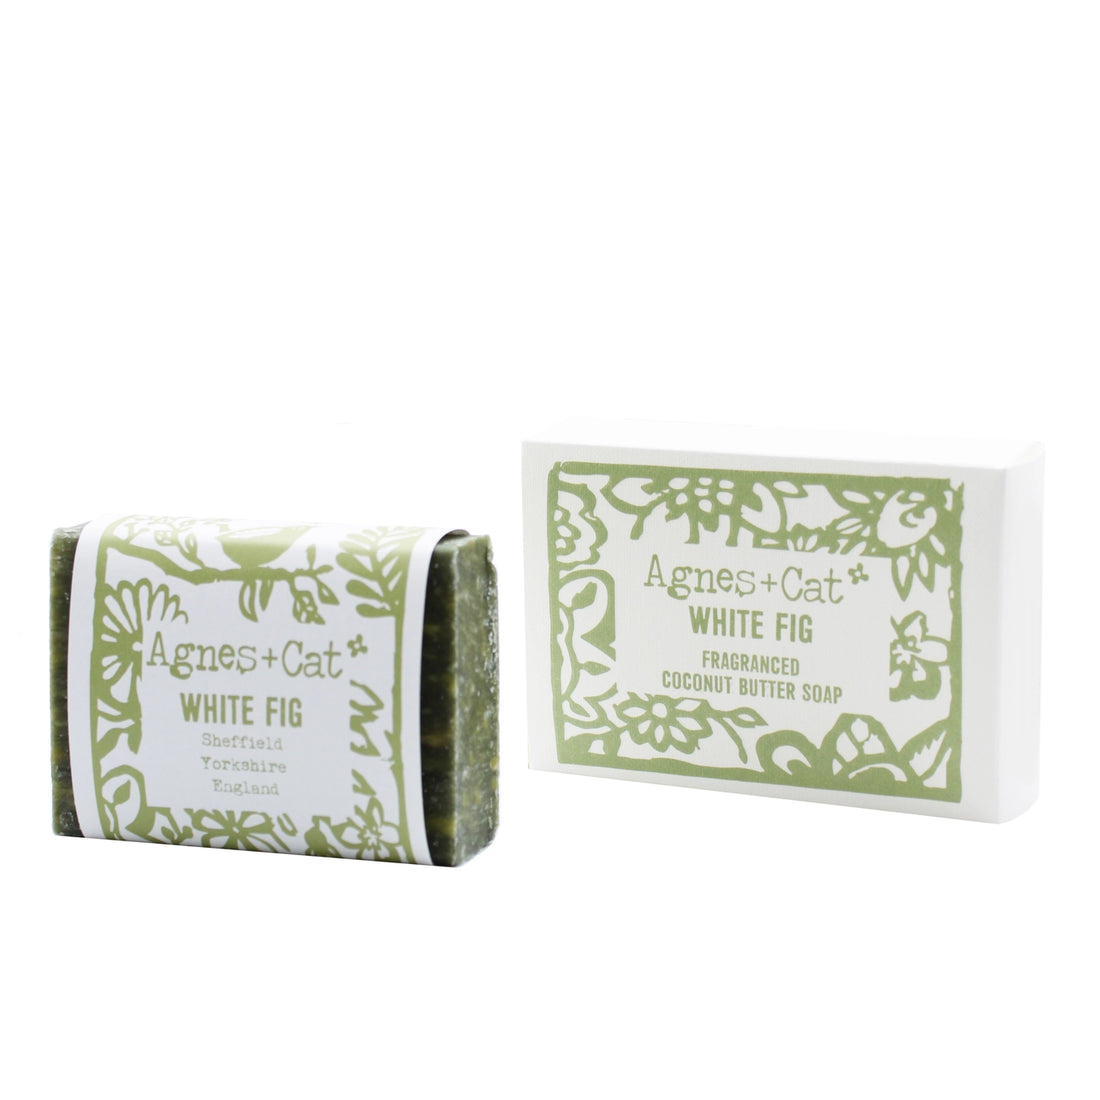 140g Coconut Butter Soap - White Fig